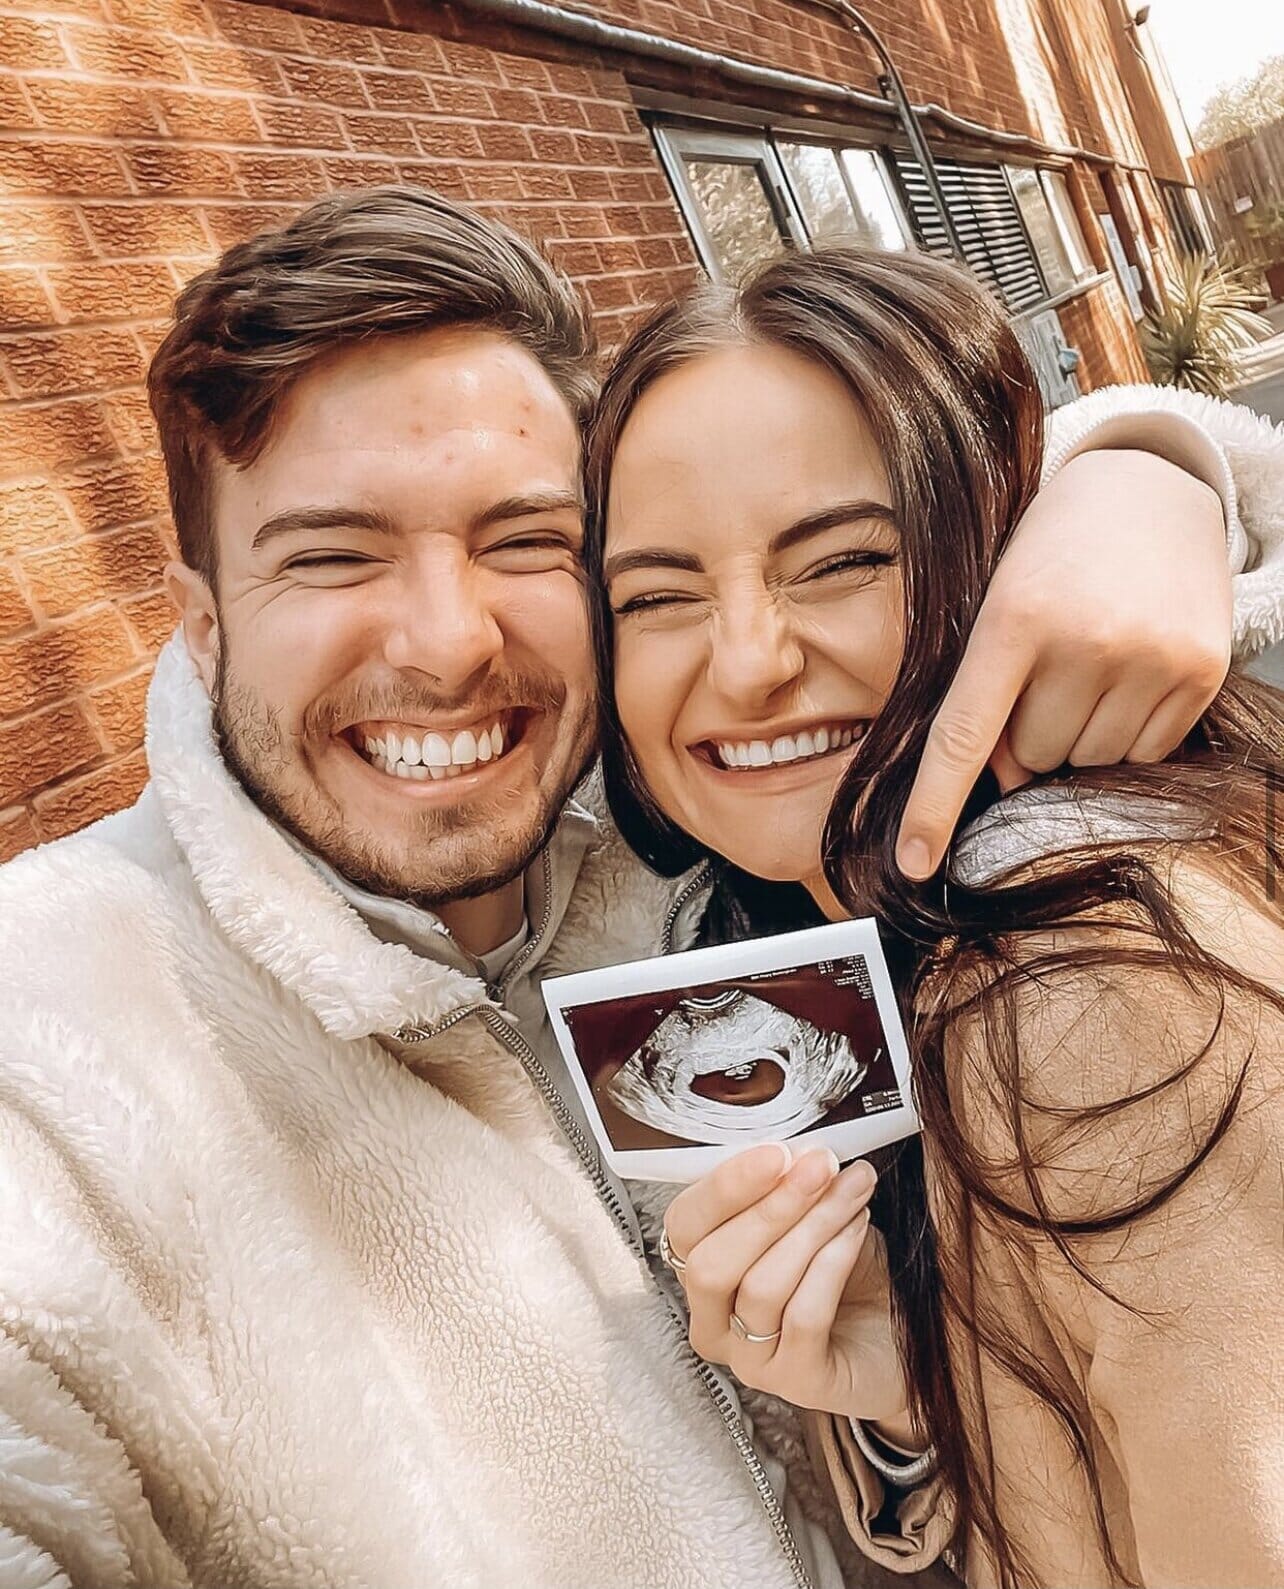 uk ambassador for endometriosis miranda burns and her partner with a sonogram photo of their baby